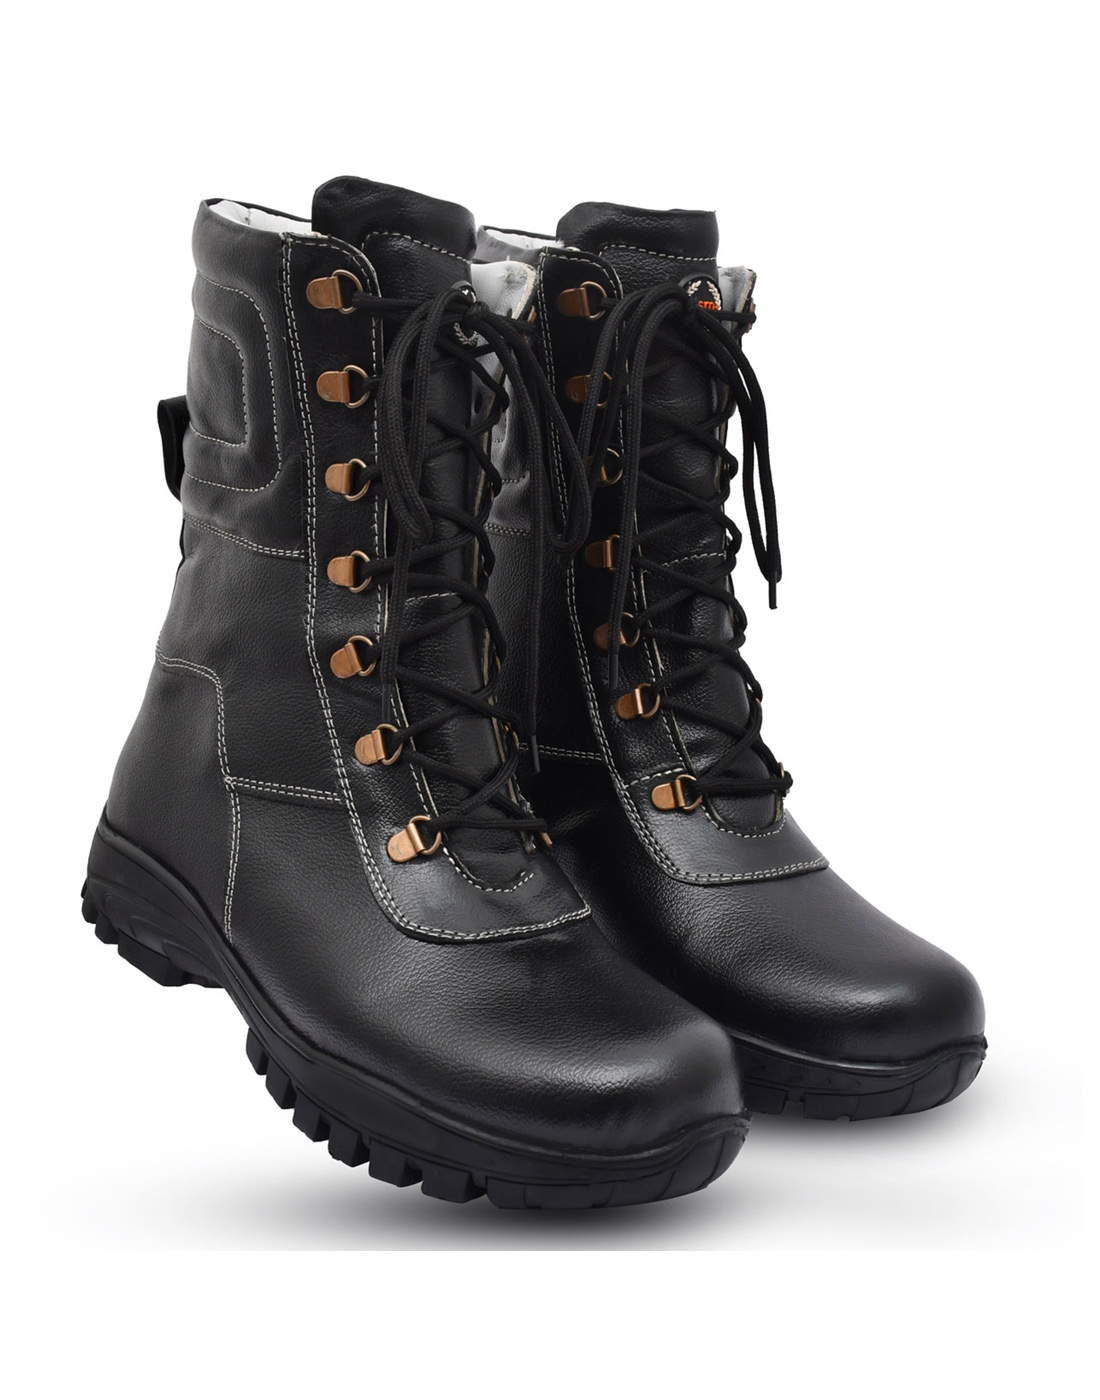 Biker Boots : Pure leather, Steel Toe with Rubber Sole by ASM